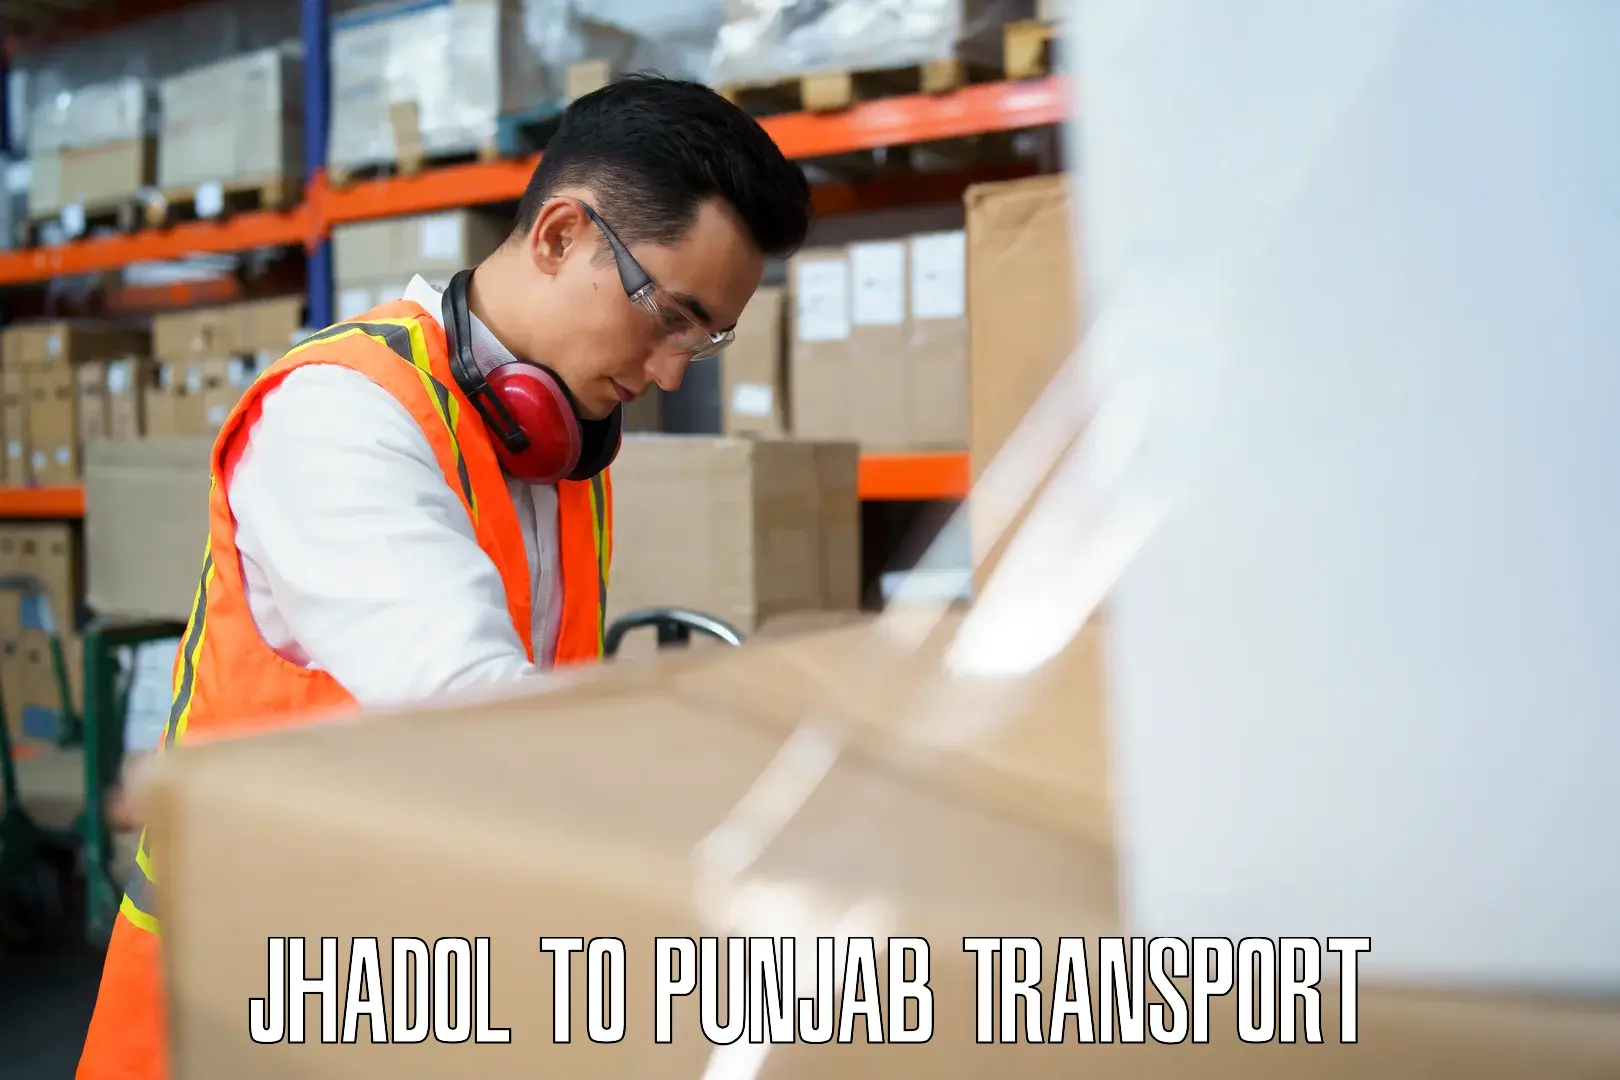 Goods delivery service Jhadol to Punjab